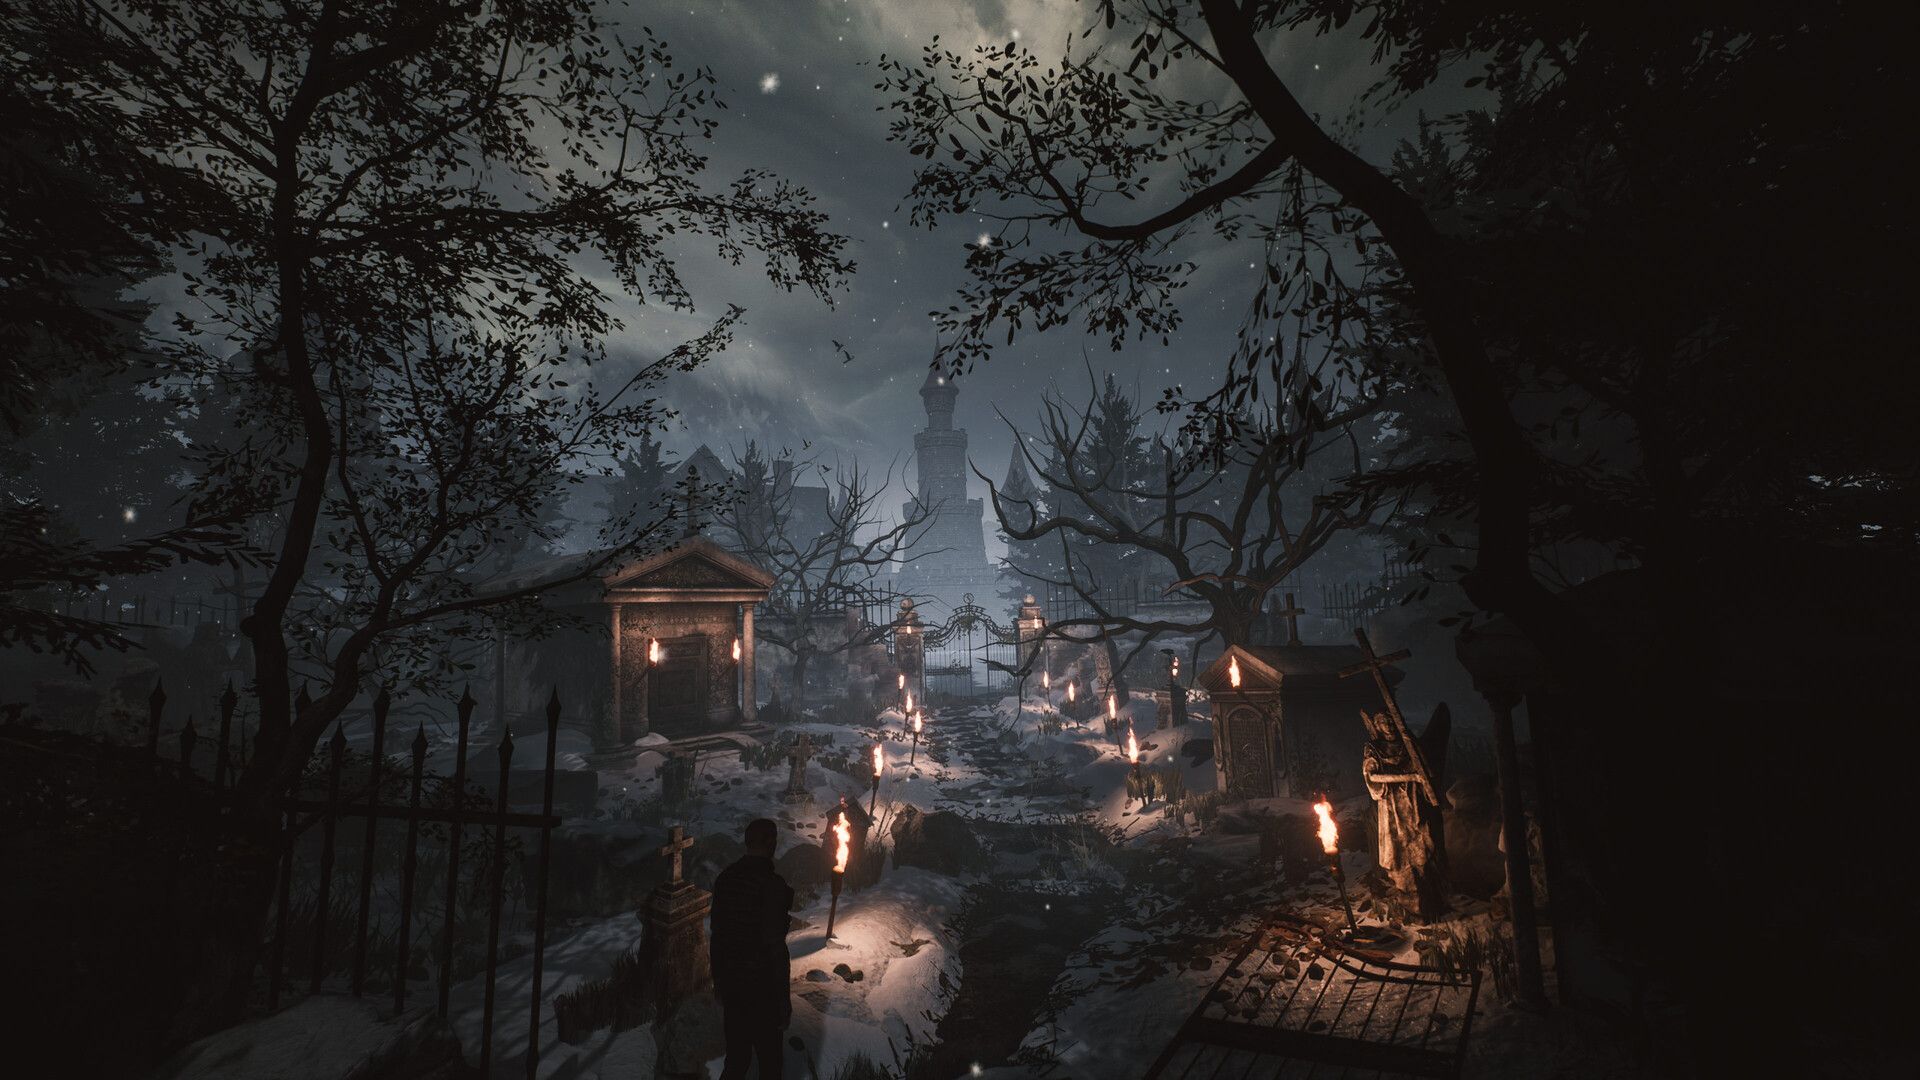 The Dark Gate Unreal Engine 4.26 inspired by Resident Evil 8 Village, Pasquale Scionti